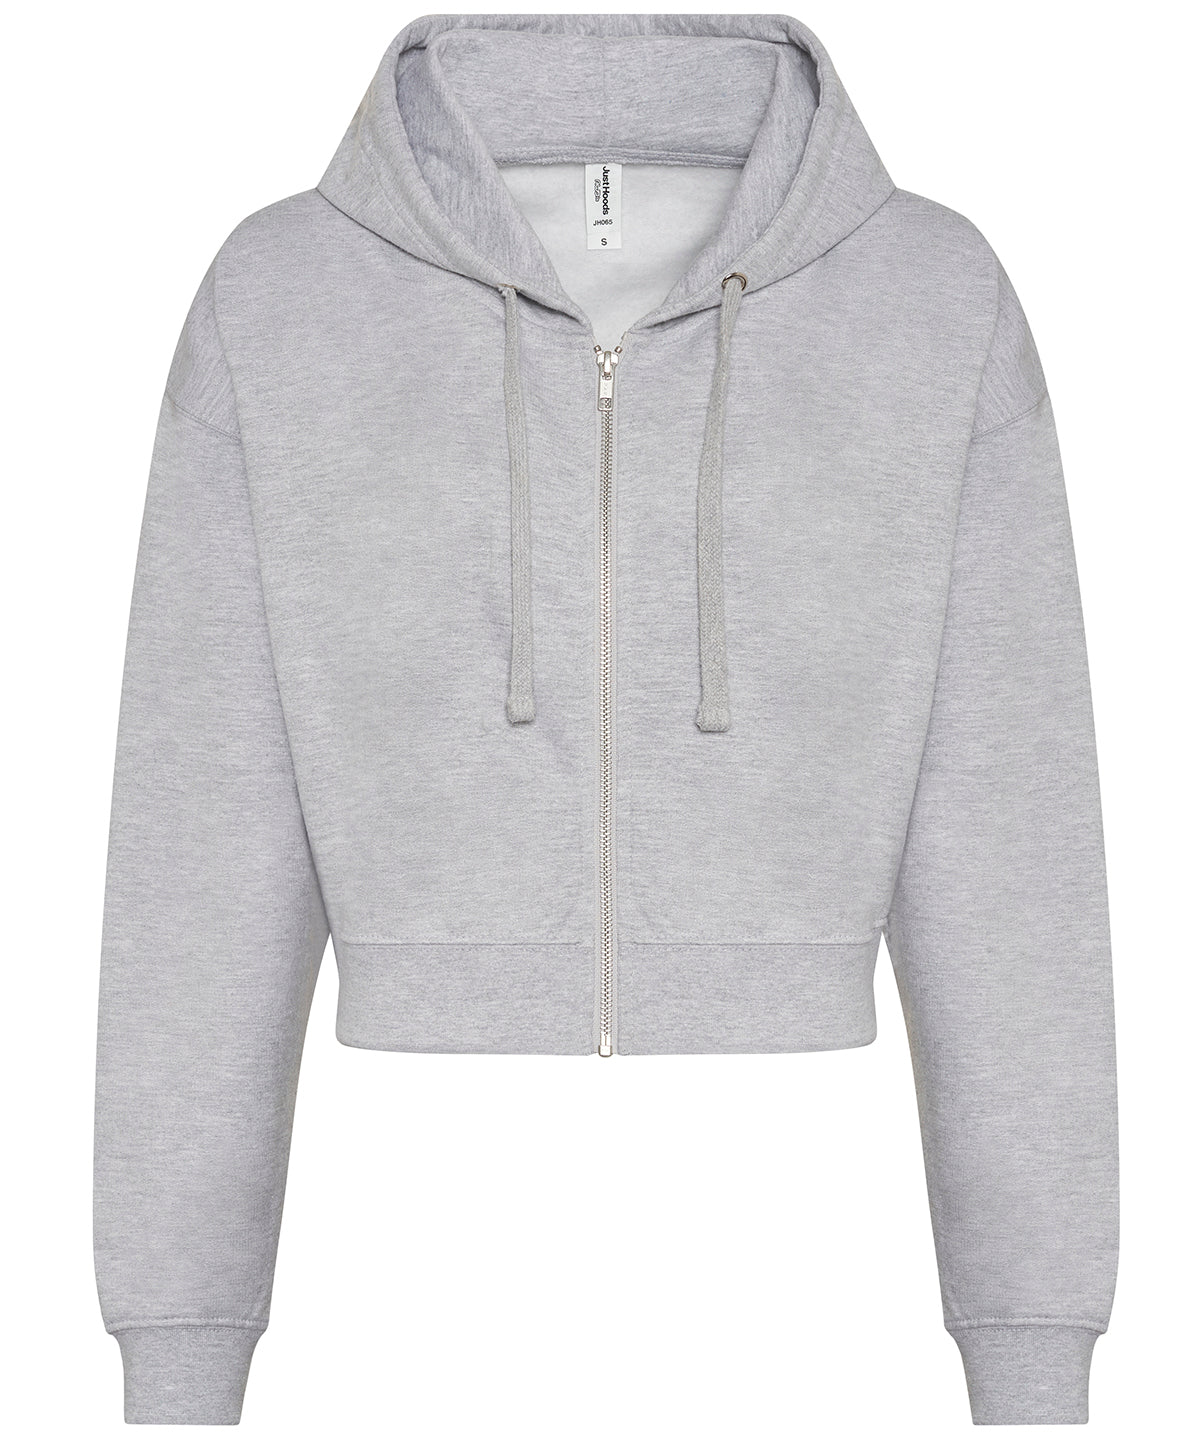 Personalised Hoodies - White AWDis Just Hoods Women's fashion cropped zoodie